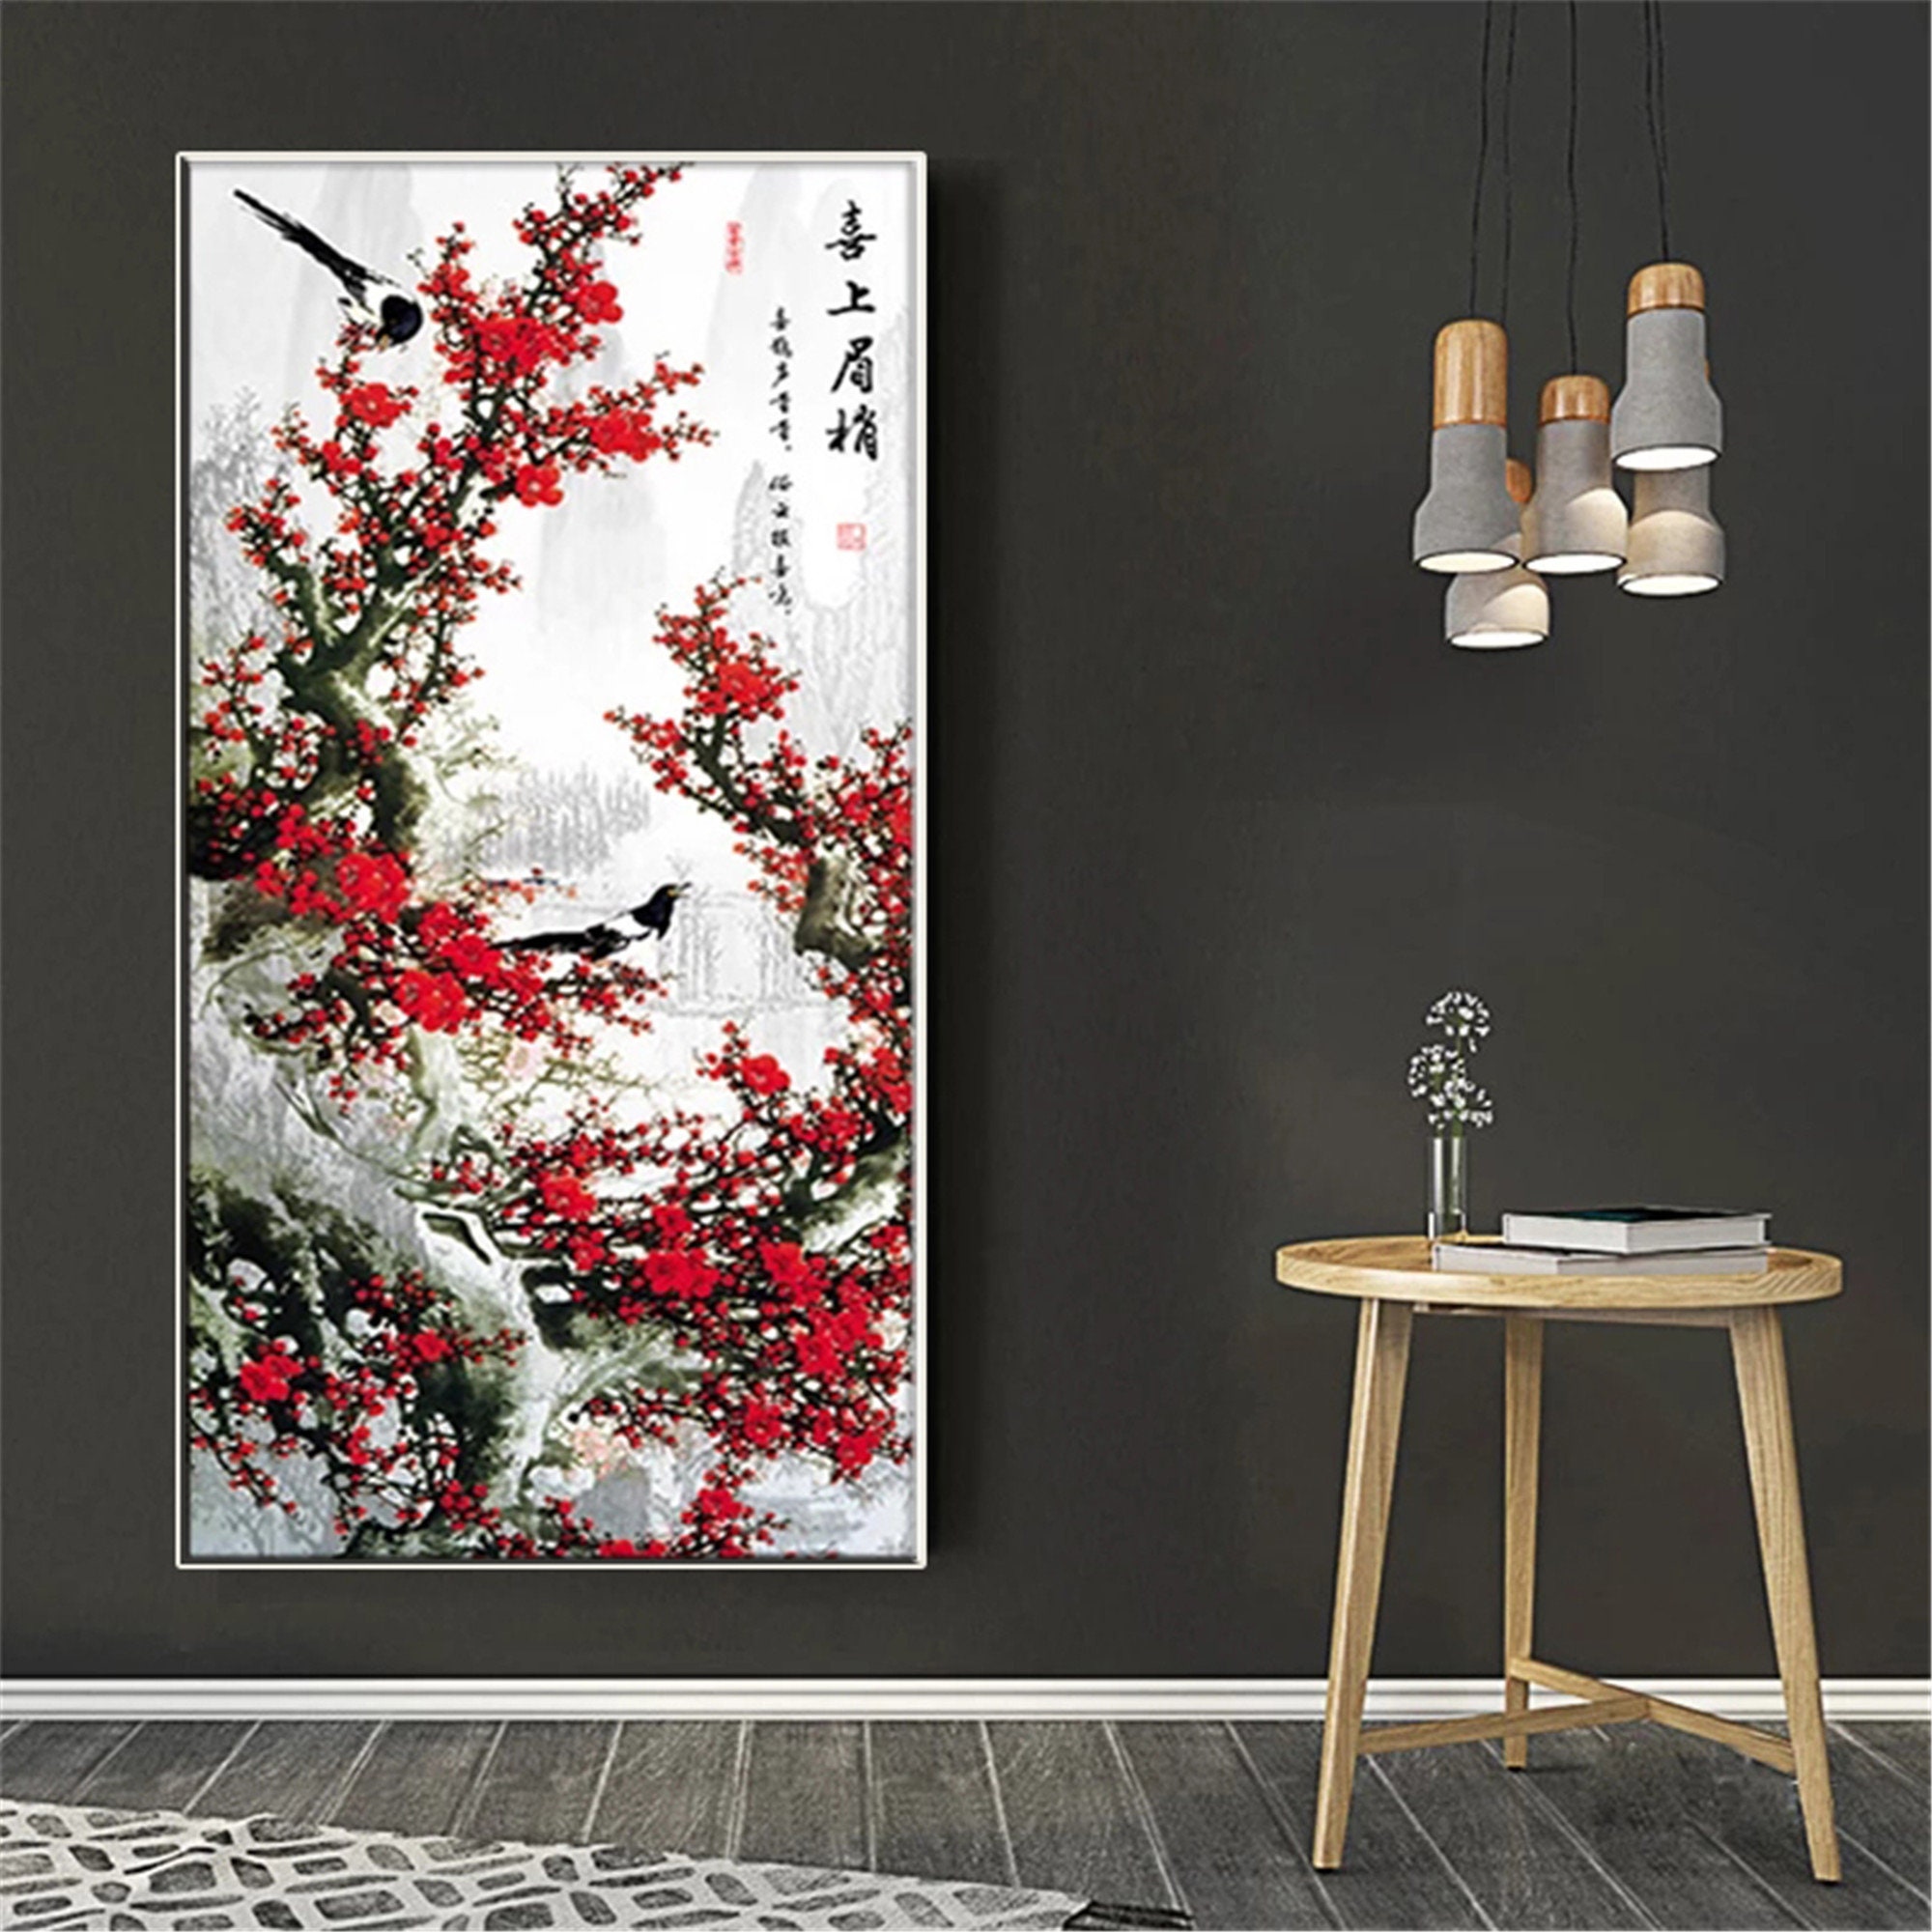 Wall Art Modern Chinese Painting Plum Blossom Canvas Landscape Office Decoration